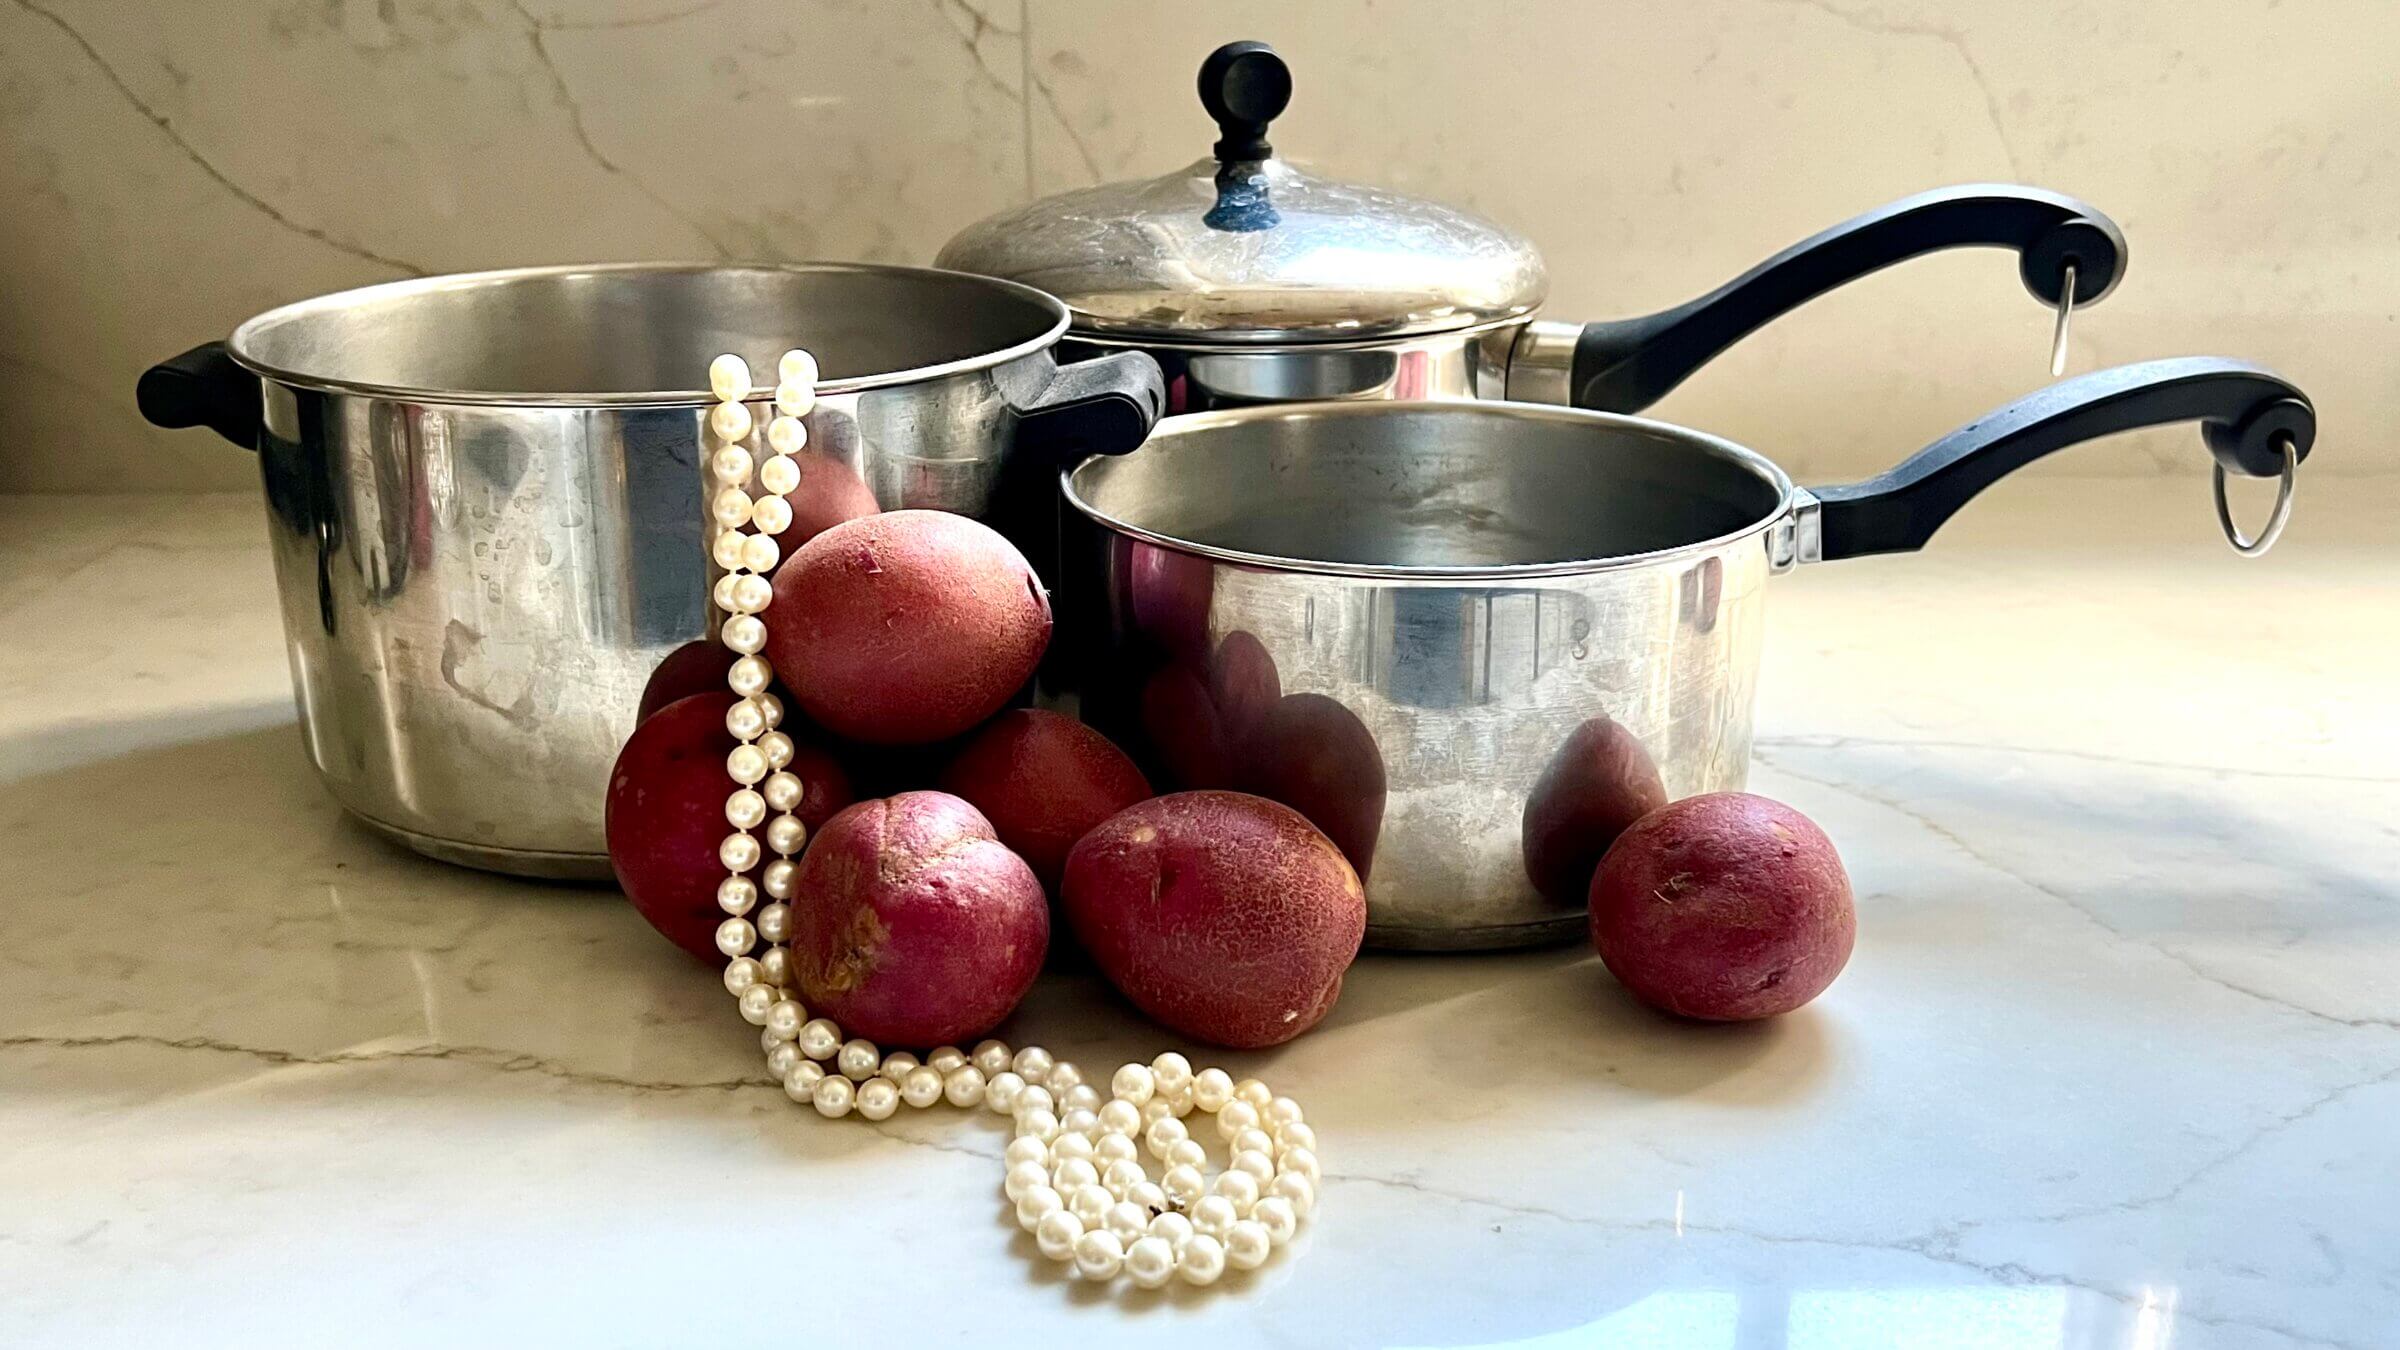 Farberware pots, potatoes and a strand of pearls serve as reminders of a loved one.